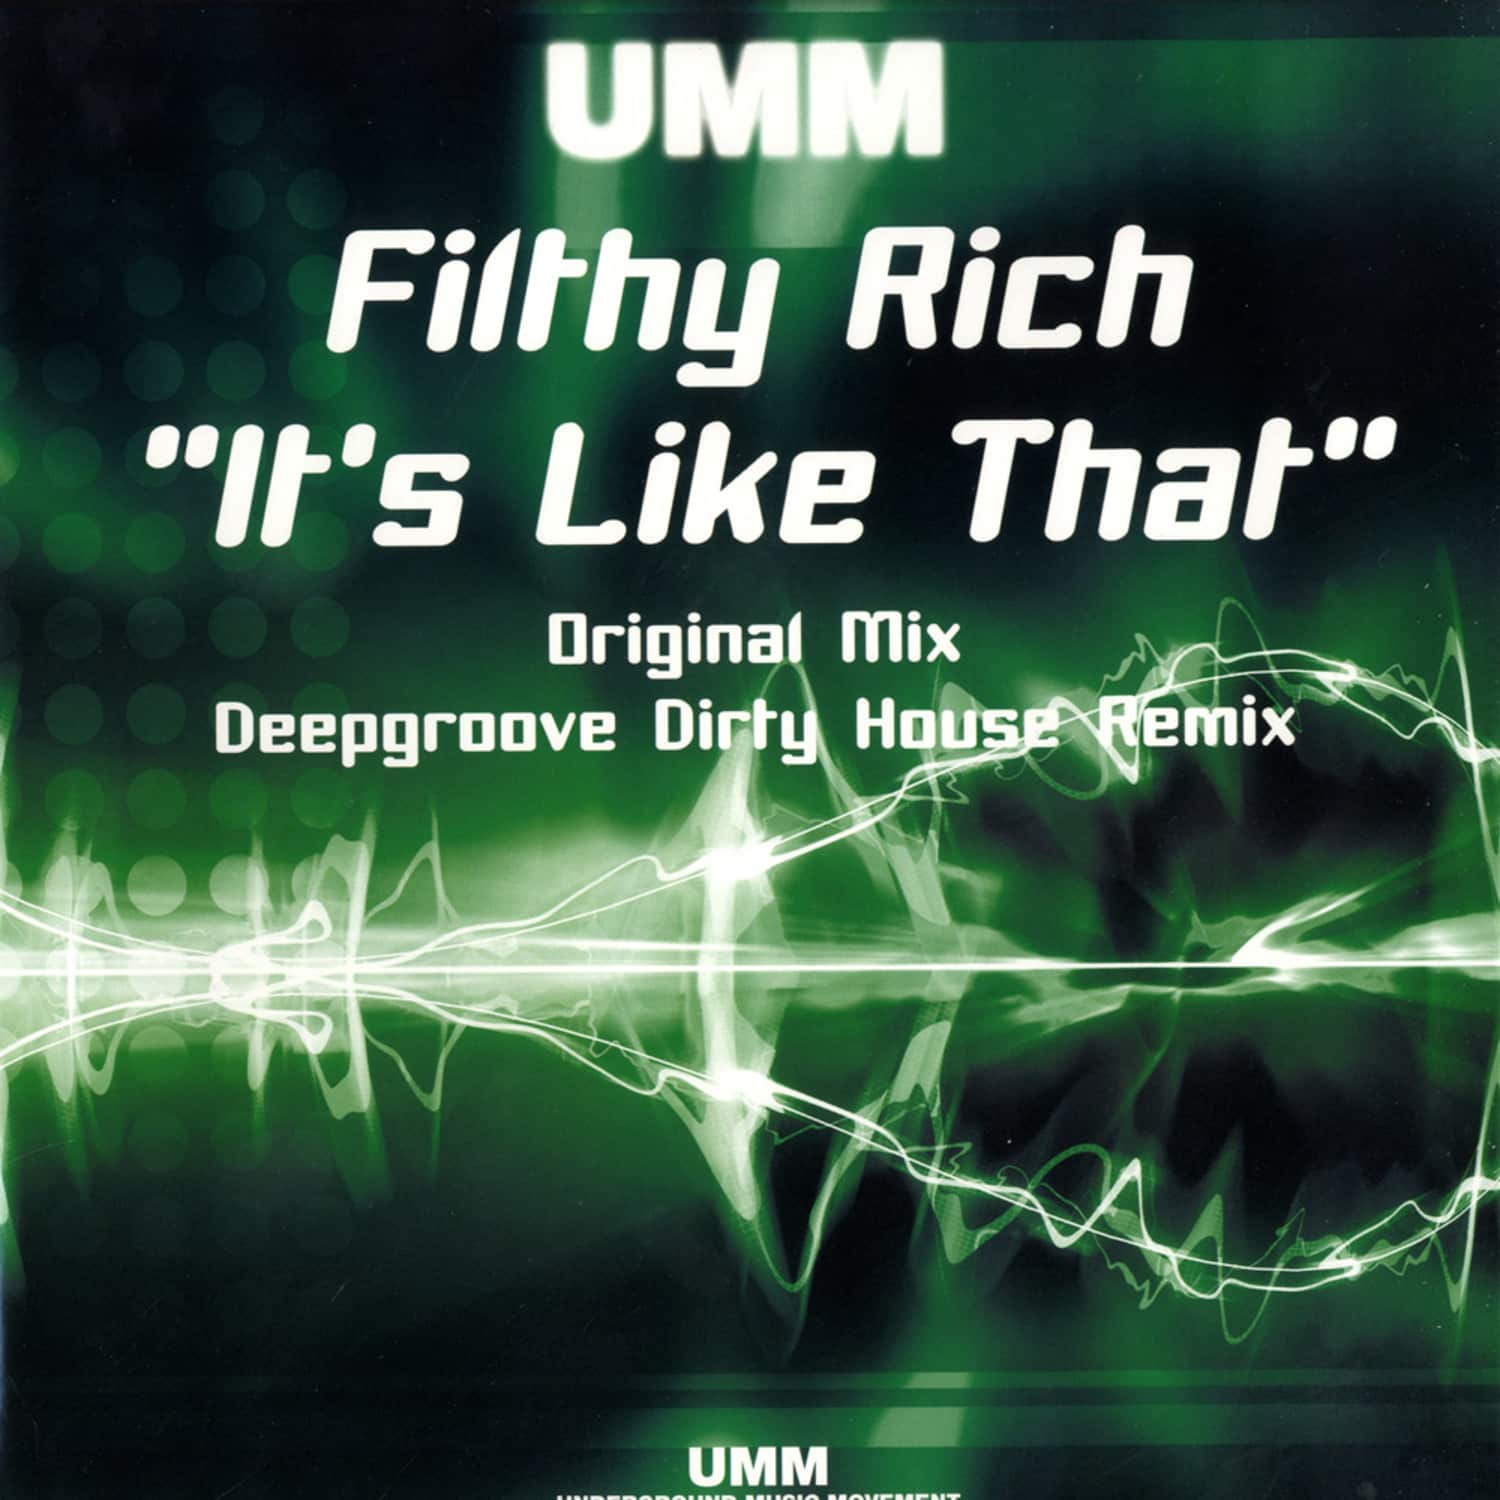 Filthy Rich - ITS LIKE THAT